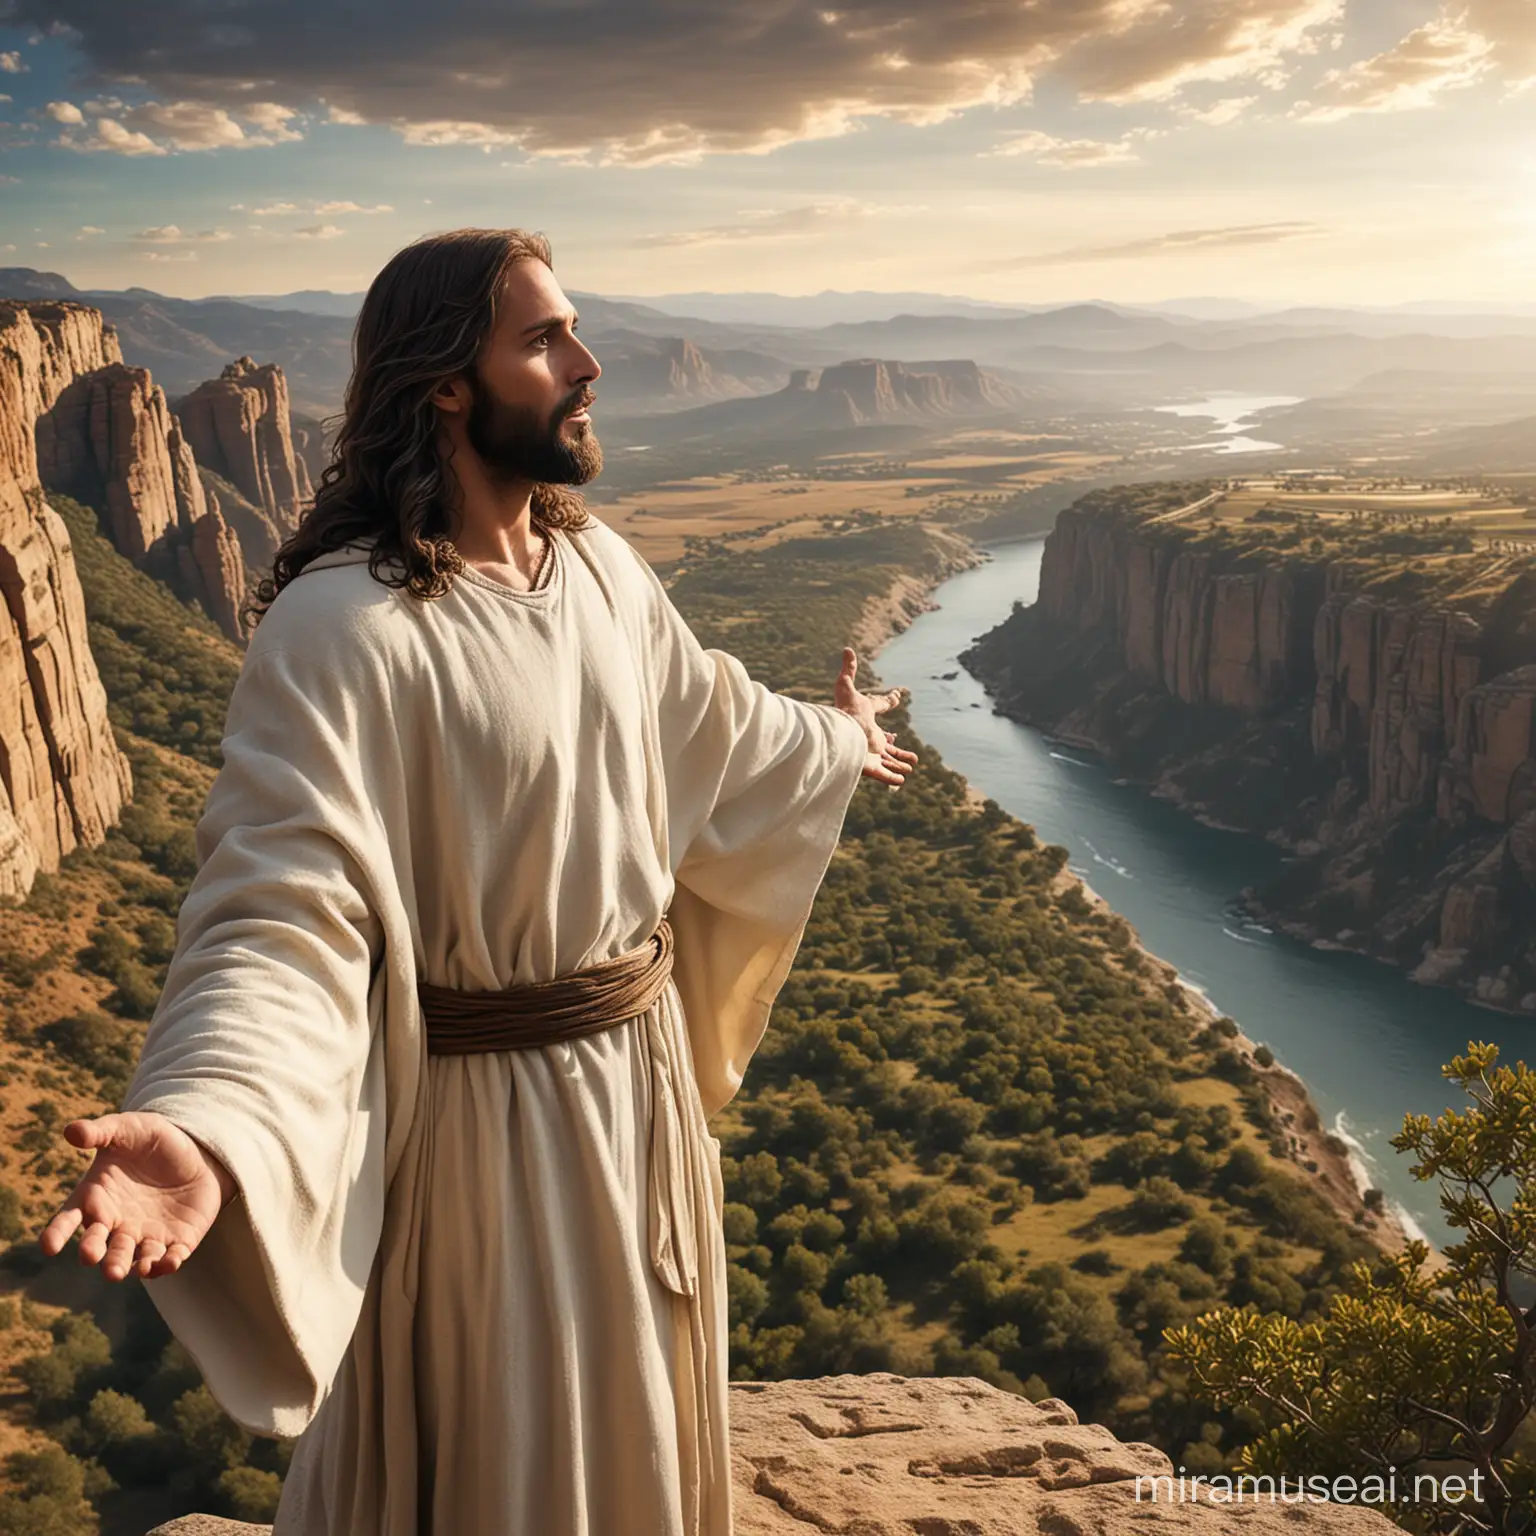 Majestic Jesus overlooking stunning scenery from a cliff